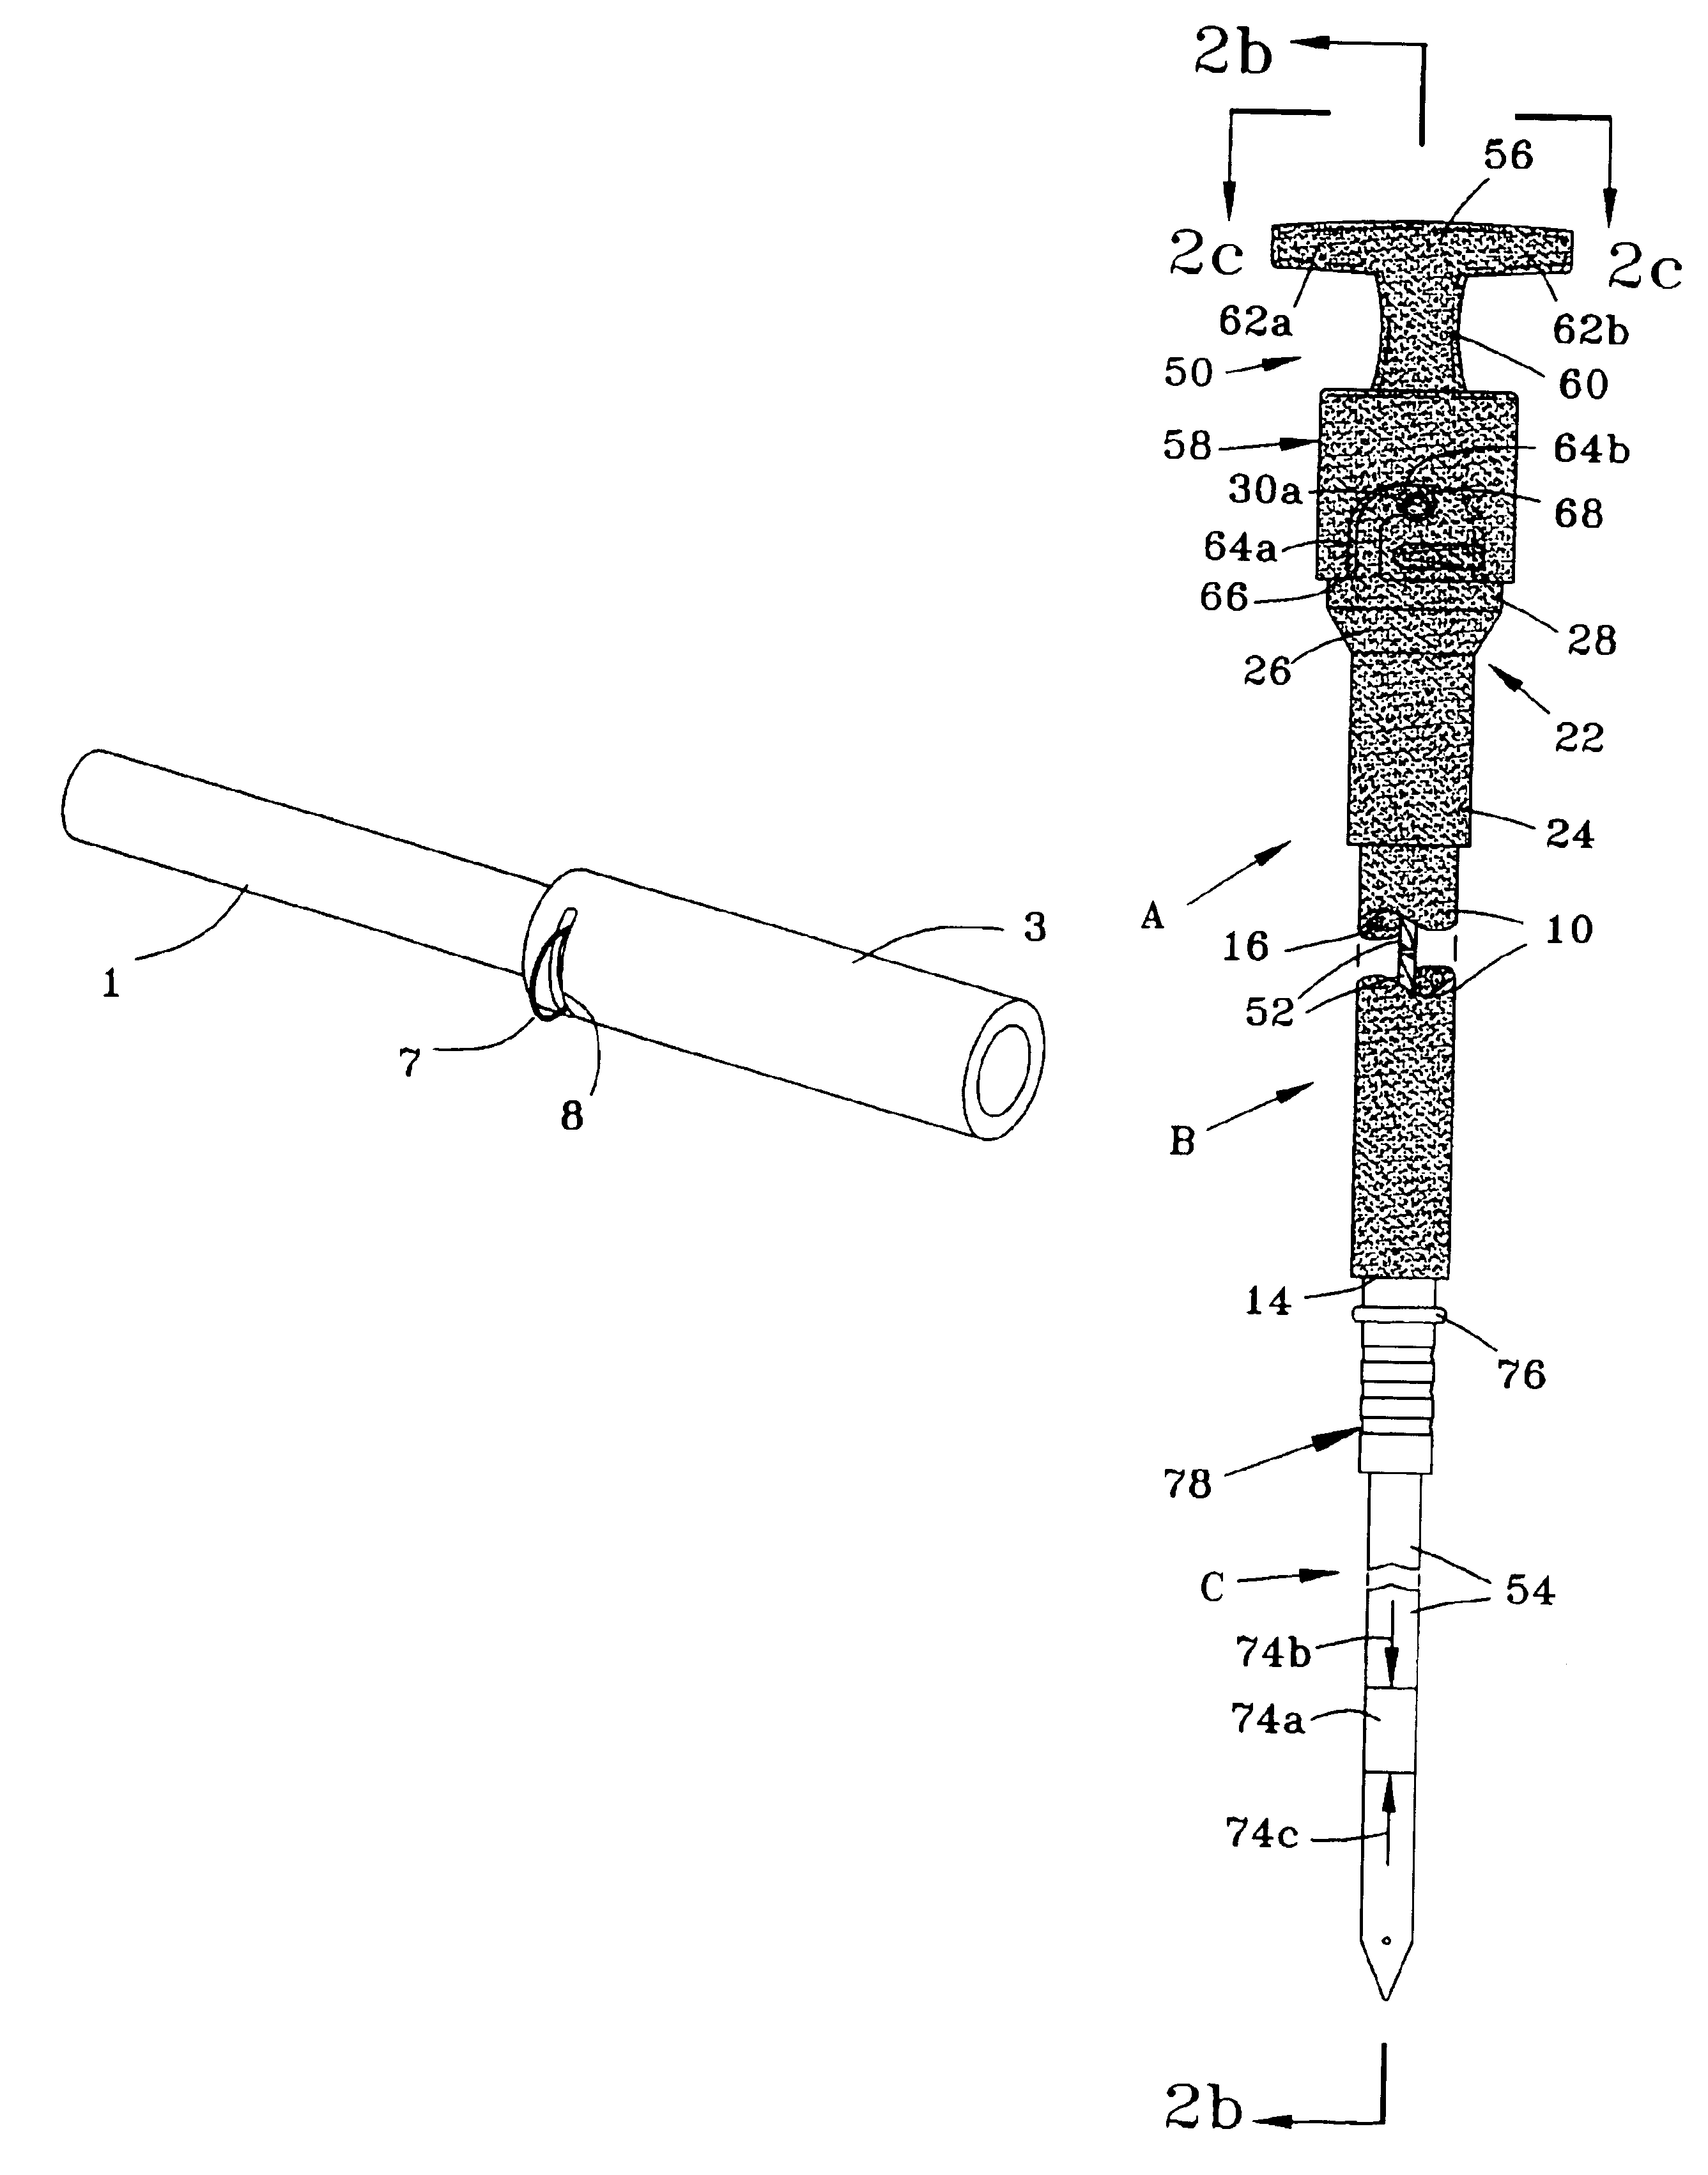 Connection system for a fluid level measuring device